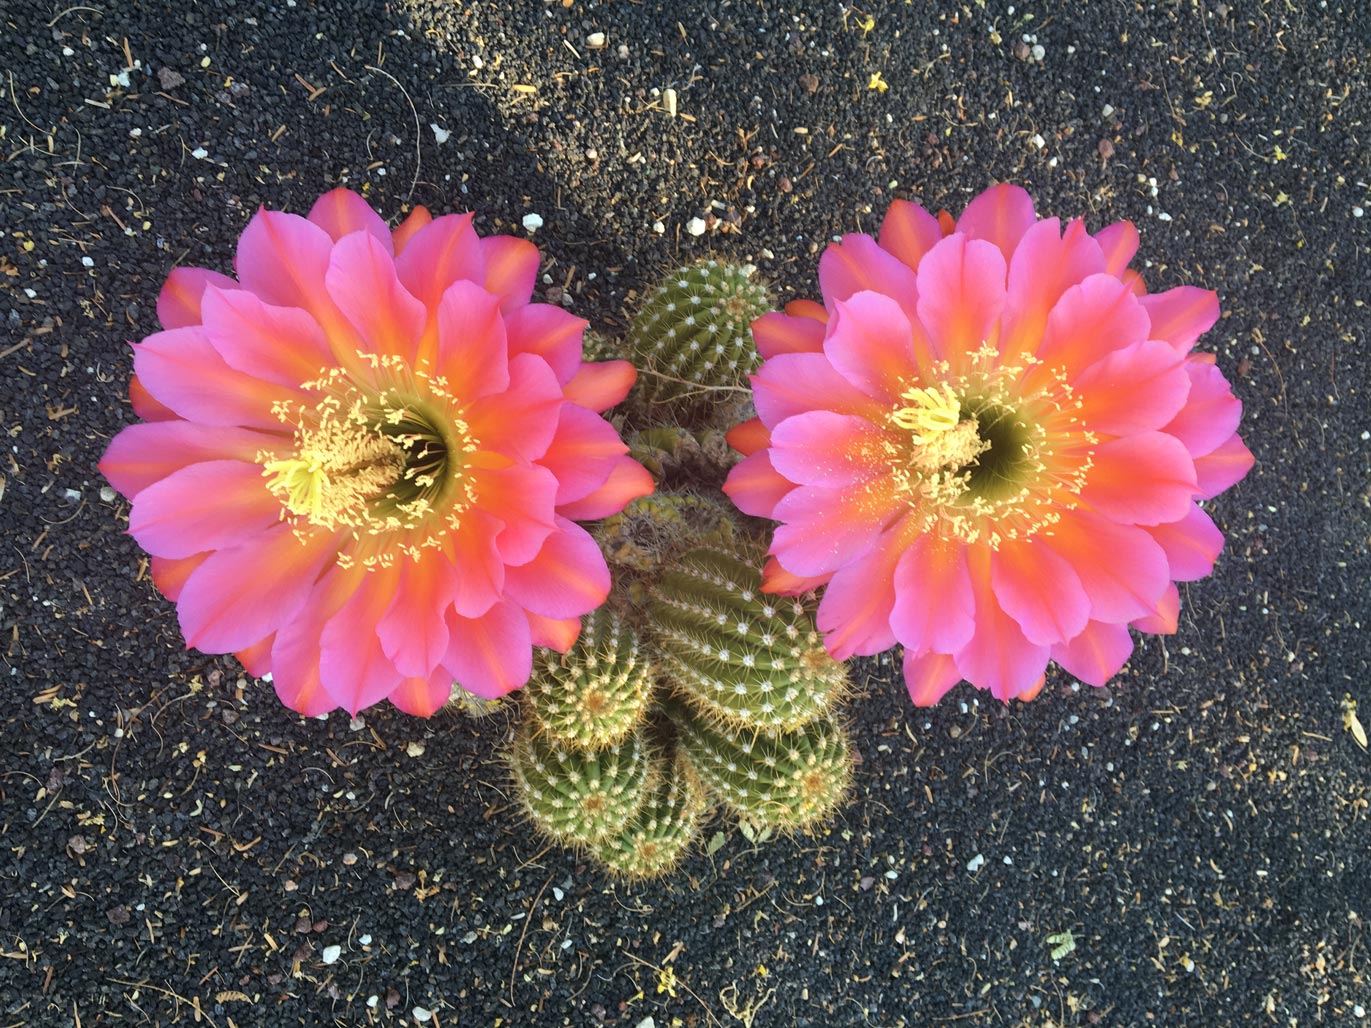 A small Torch Cactus shows off two bright pink blooms.